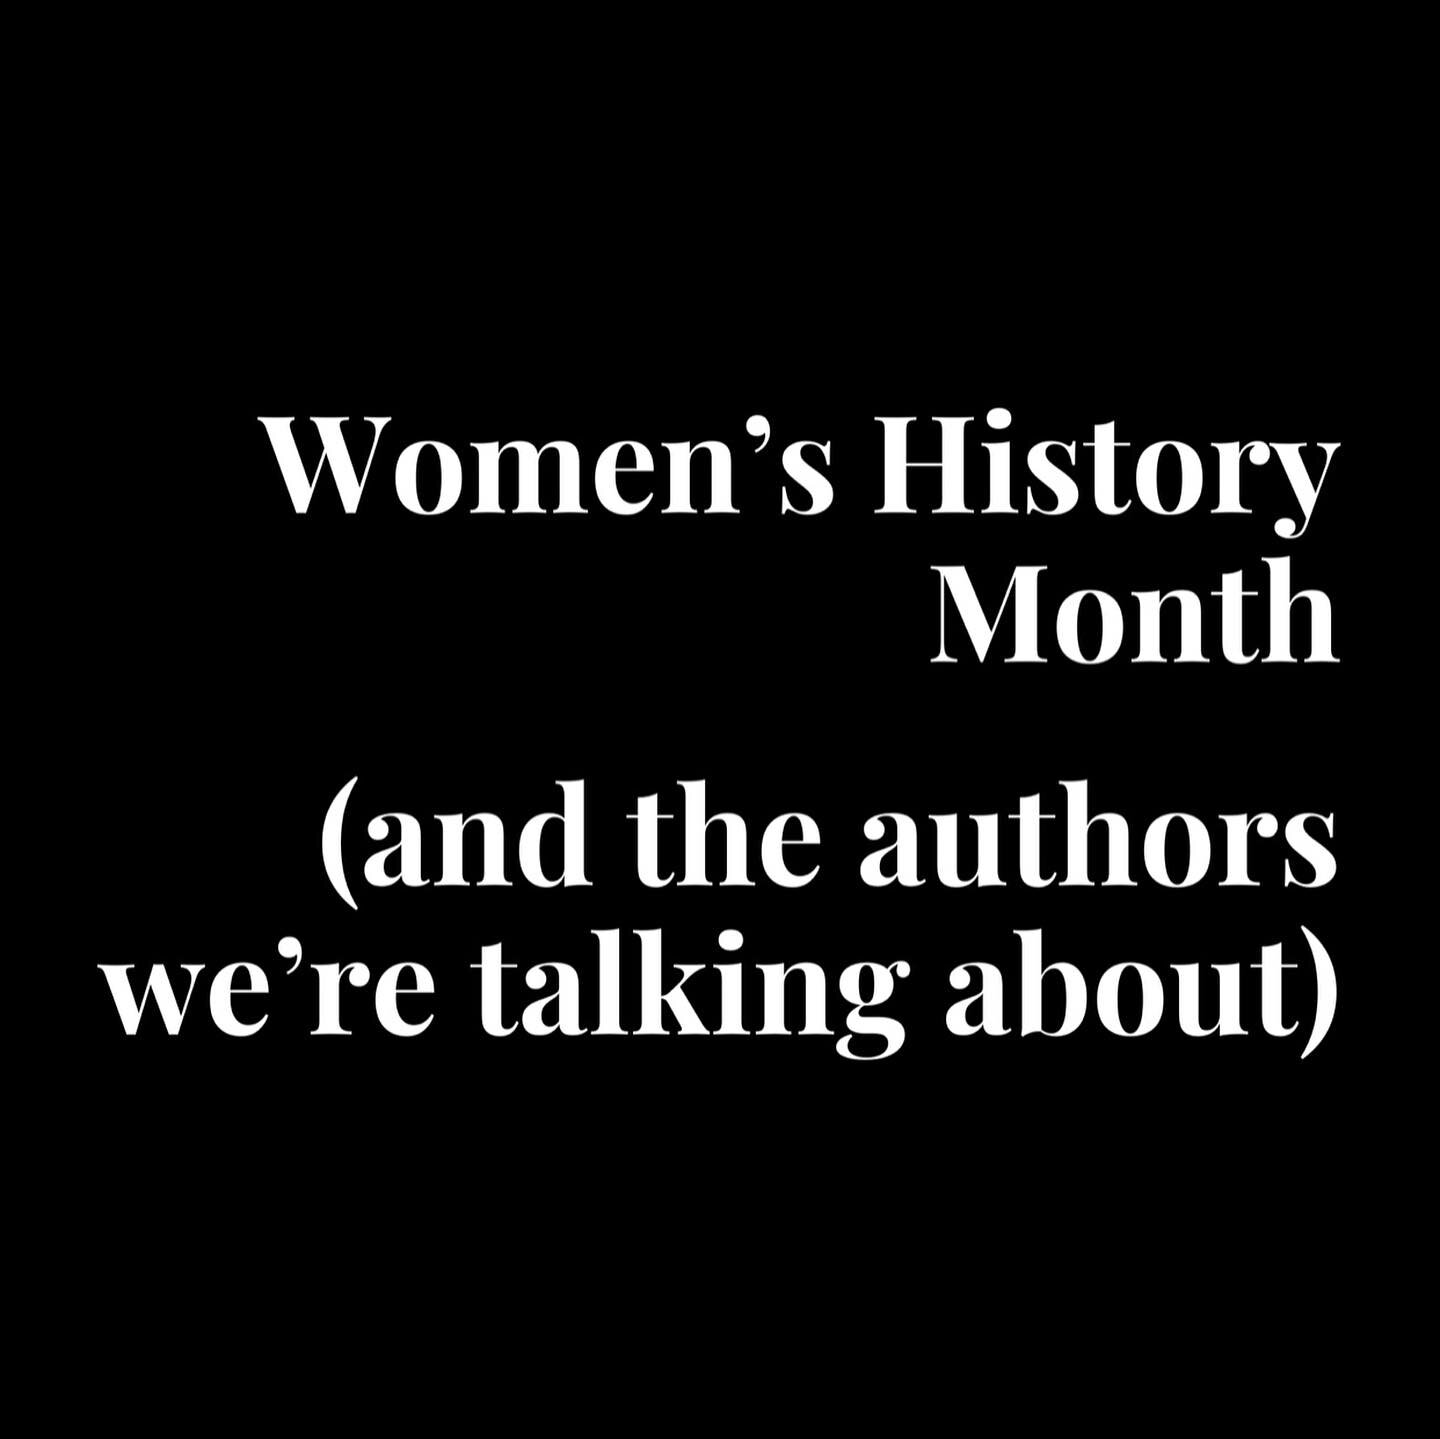 Happy Women&rsquo;s History Month! Do you have a current or long-time favorite female author? Swipe left to read about some of ours 😎✨and share with us in the comments your favorites as well! We love hearing our community gush about books! 

*****

